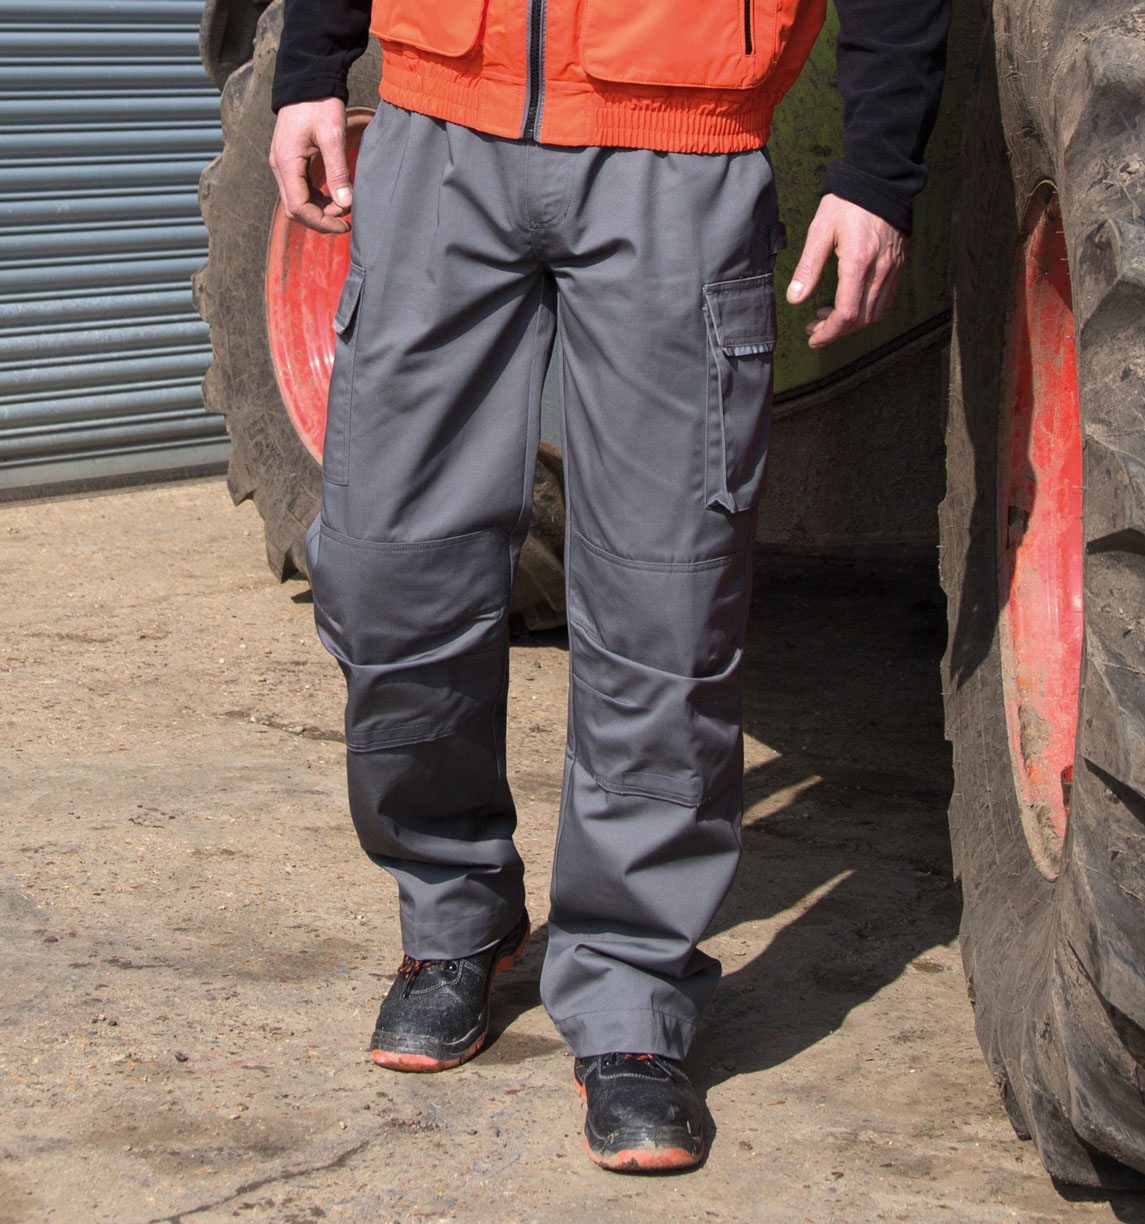 Action Trousers WorkGuard RT308